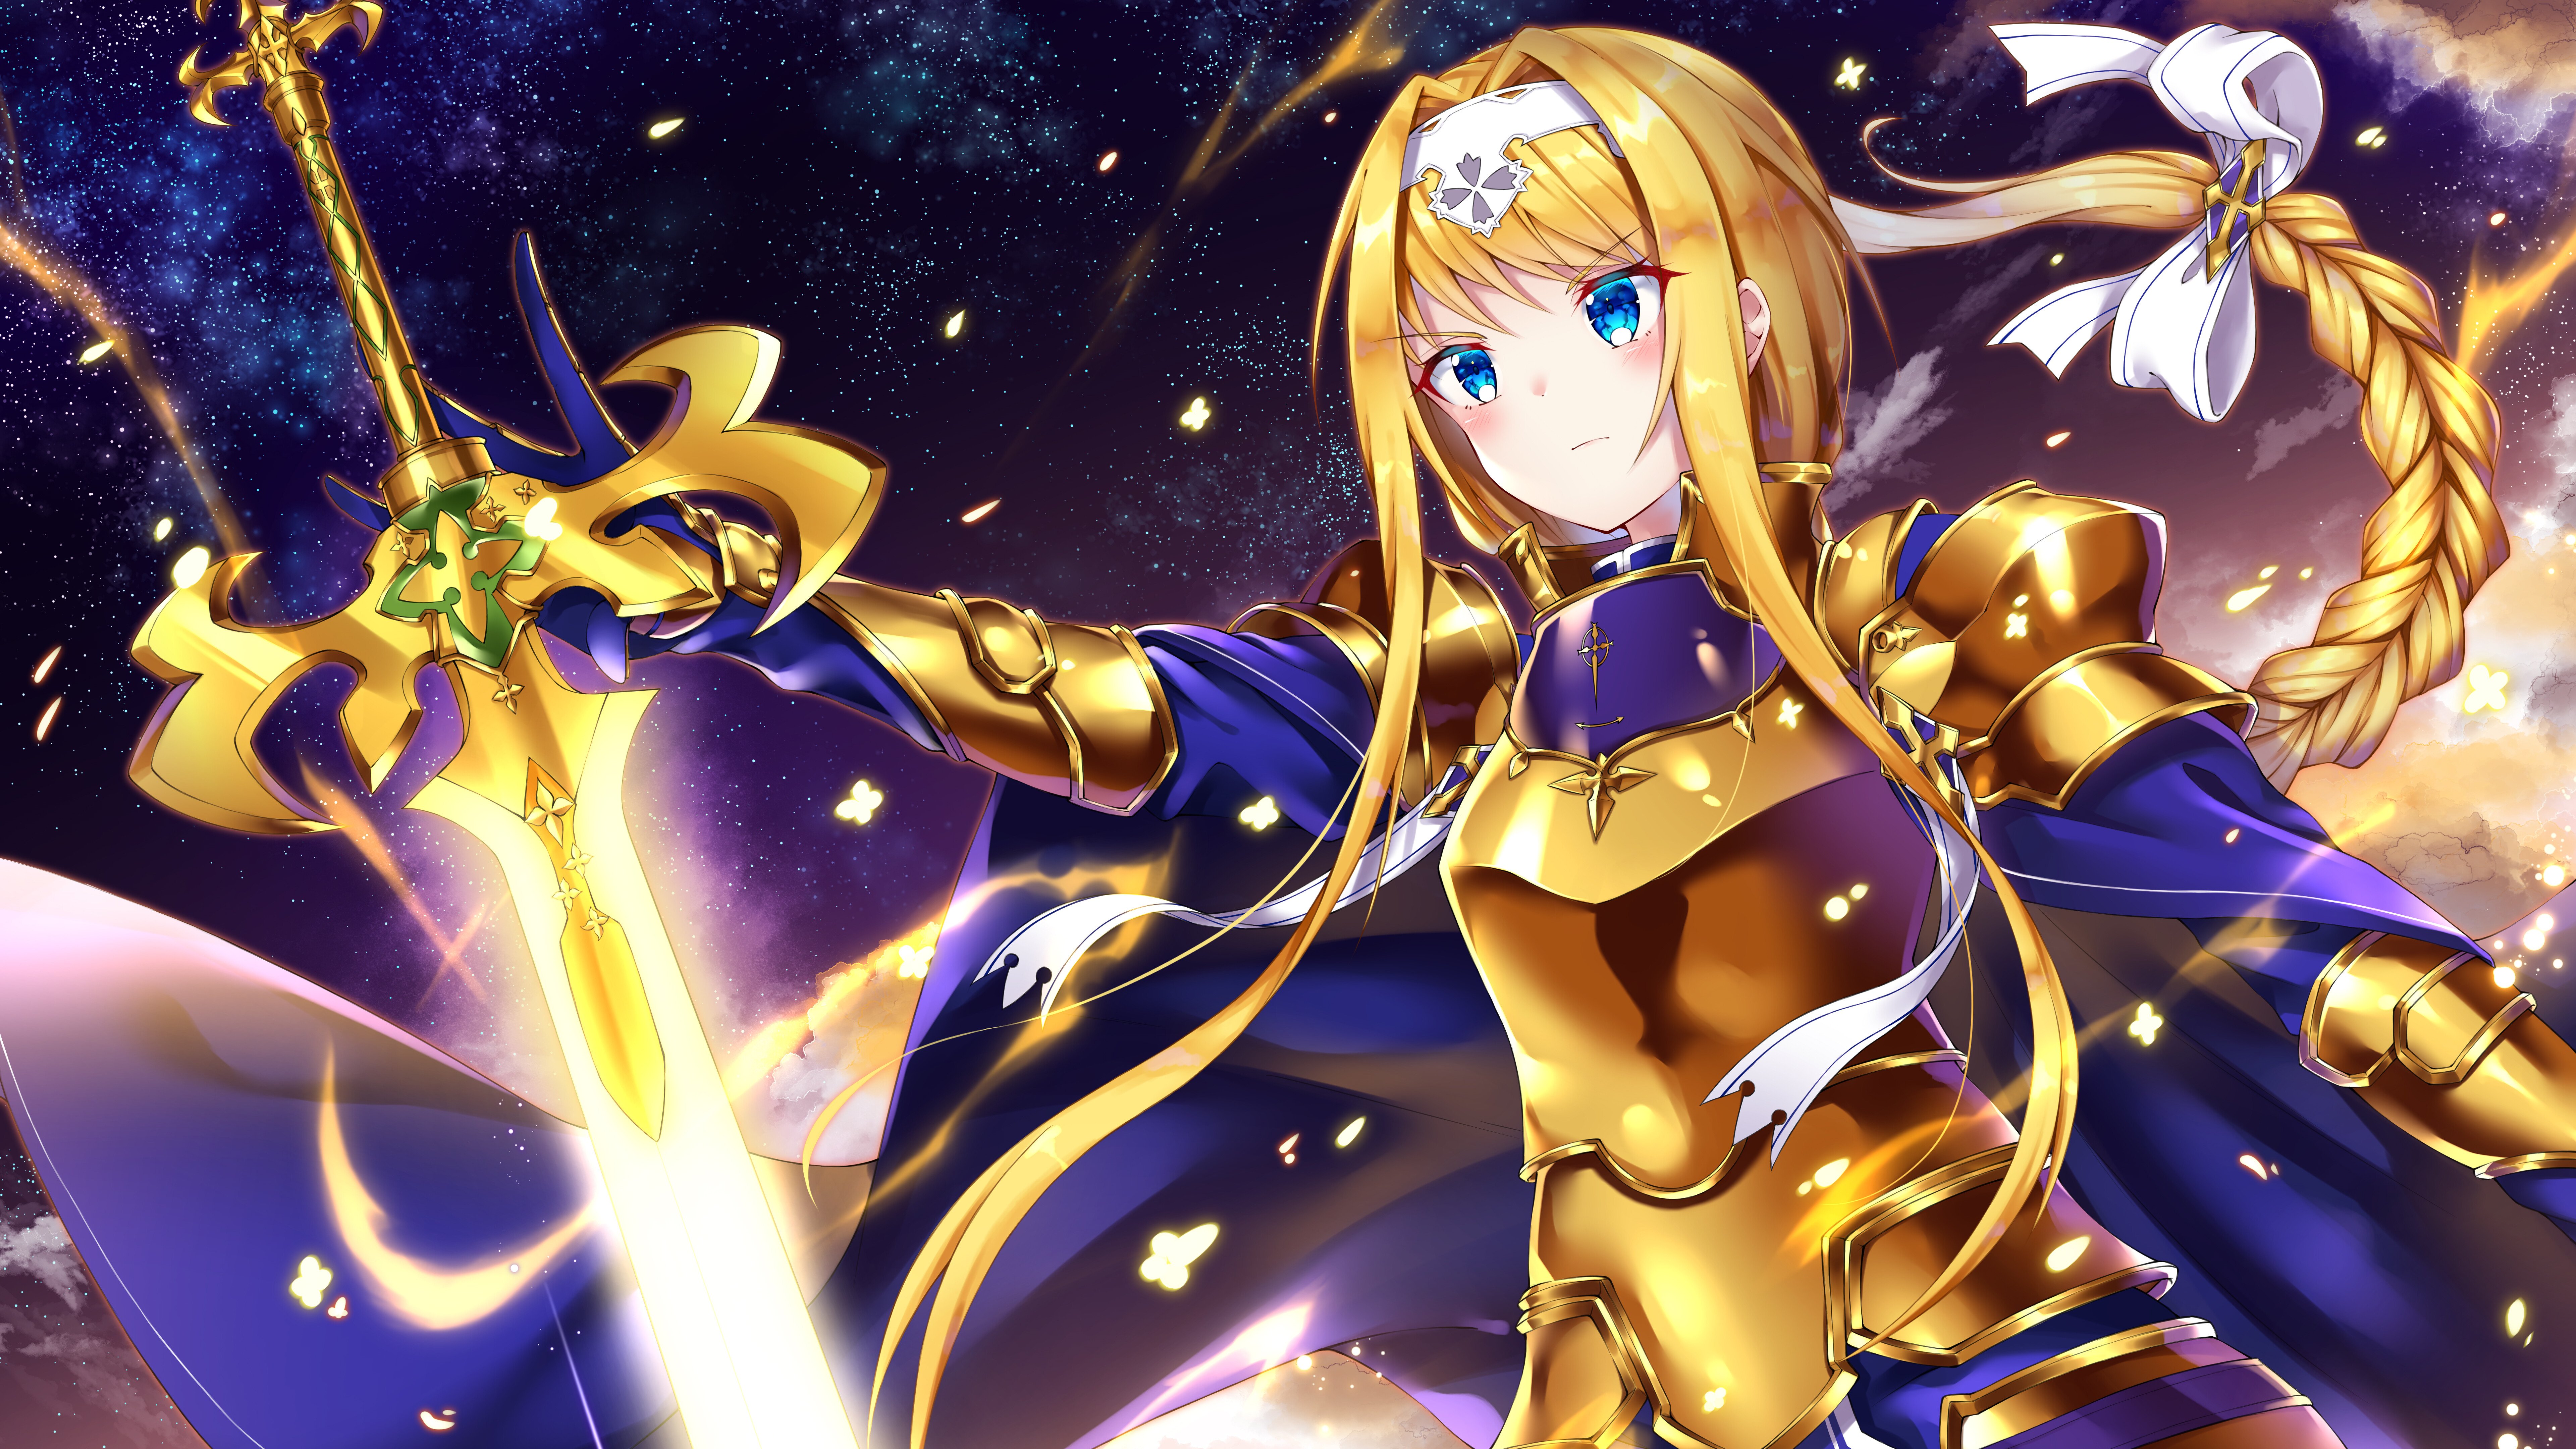 Anime Wallpaper Alice Sao with sword from Alicization